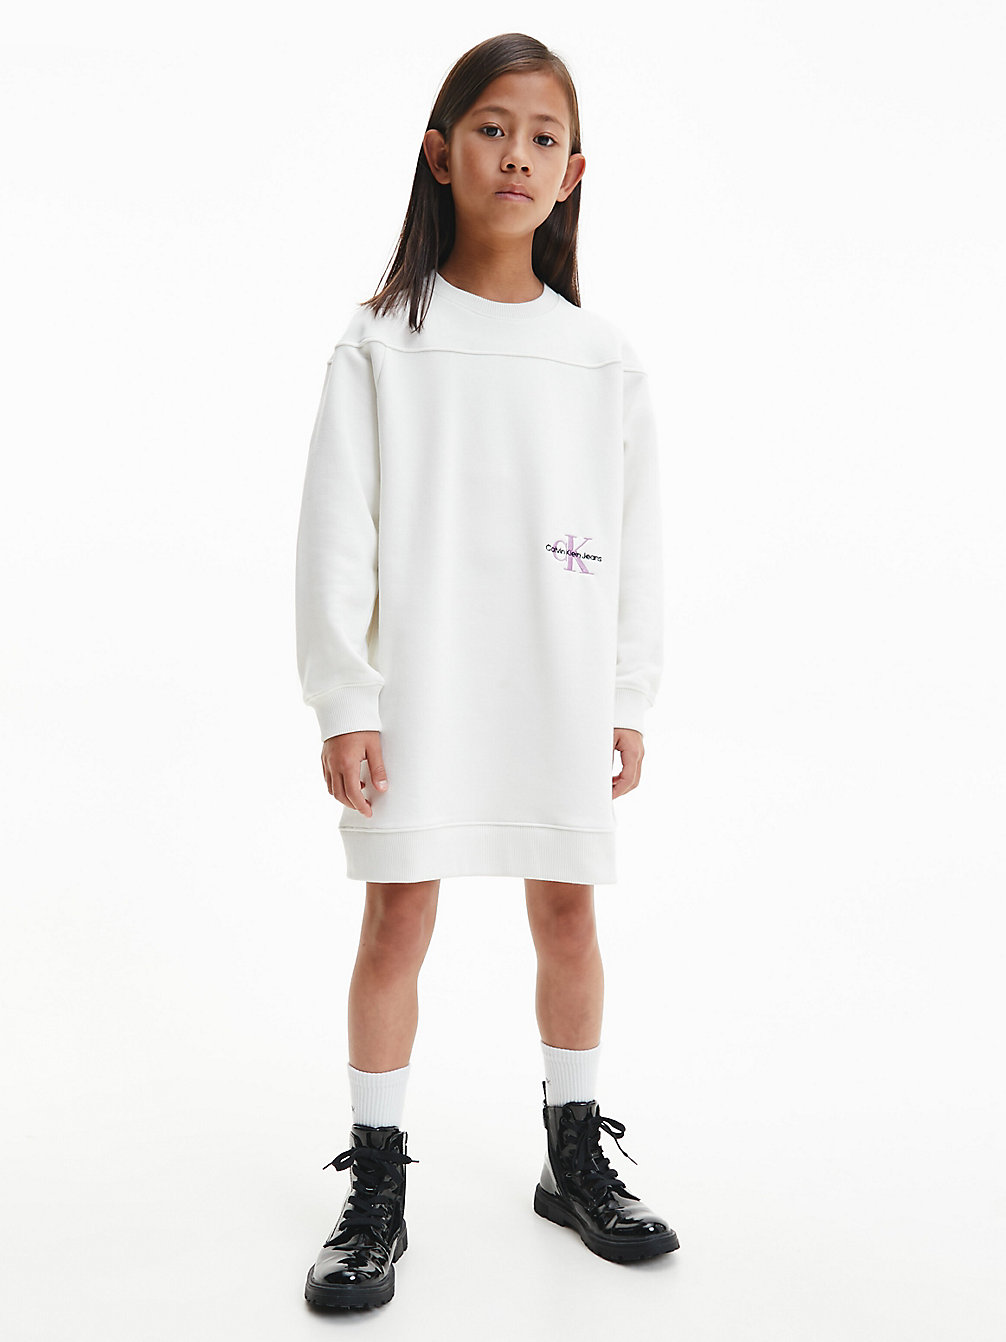 IVORY Robe Sweat Relaxed undefined girls Calvin Klein